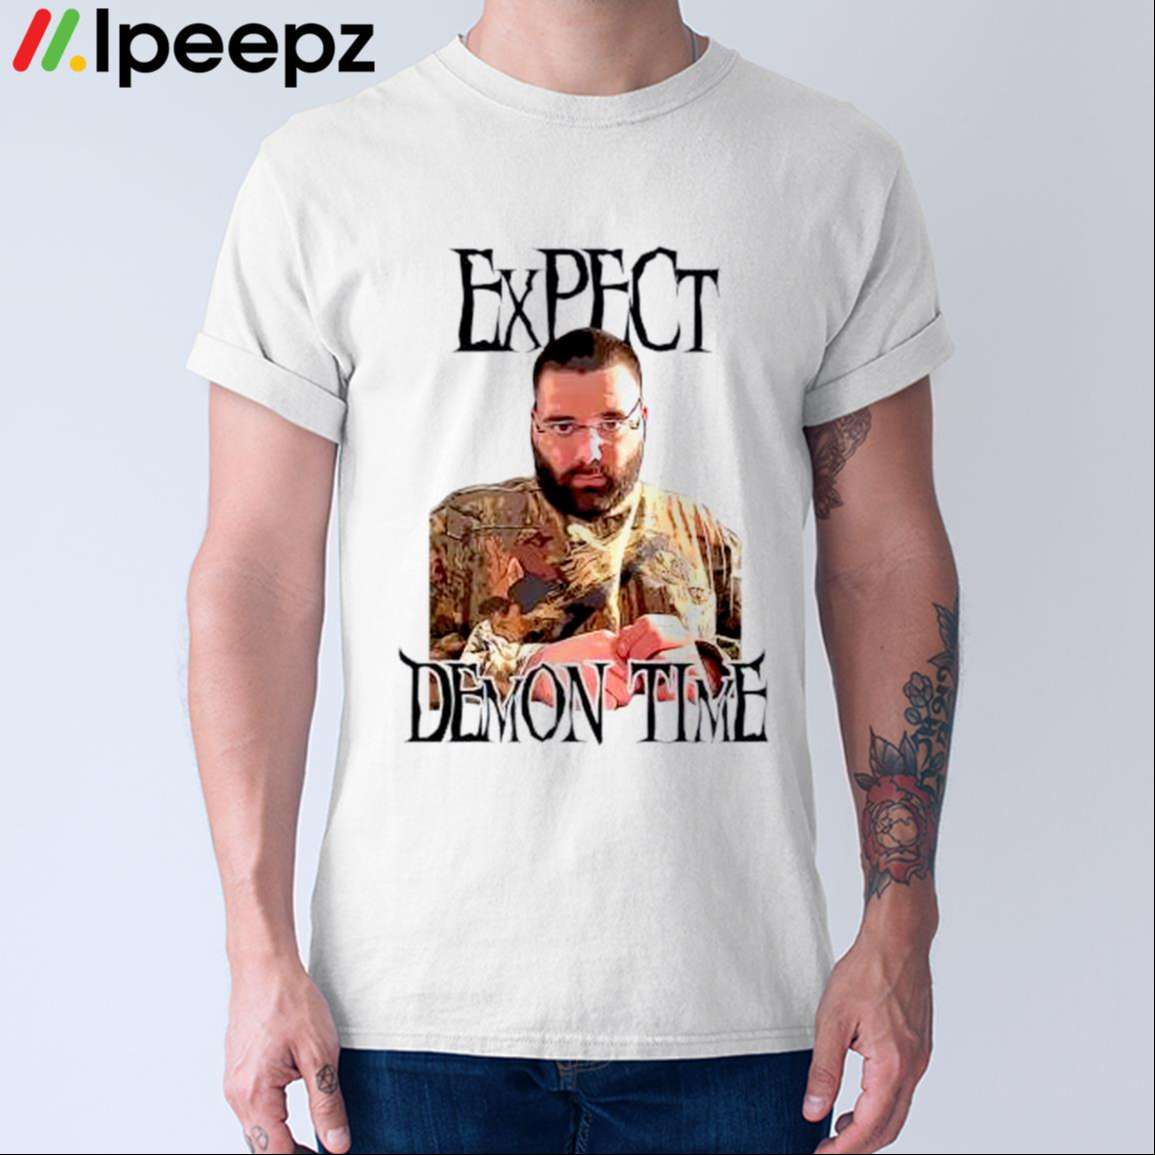 Jersey Jerry Expect Demon Time Shirt